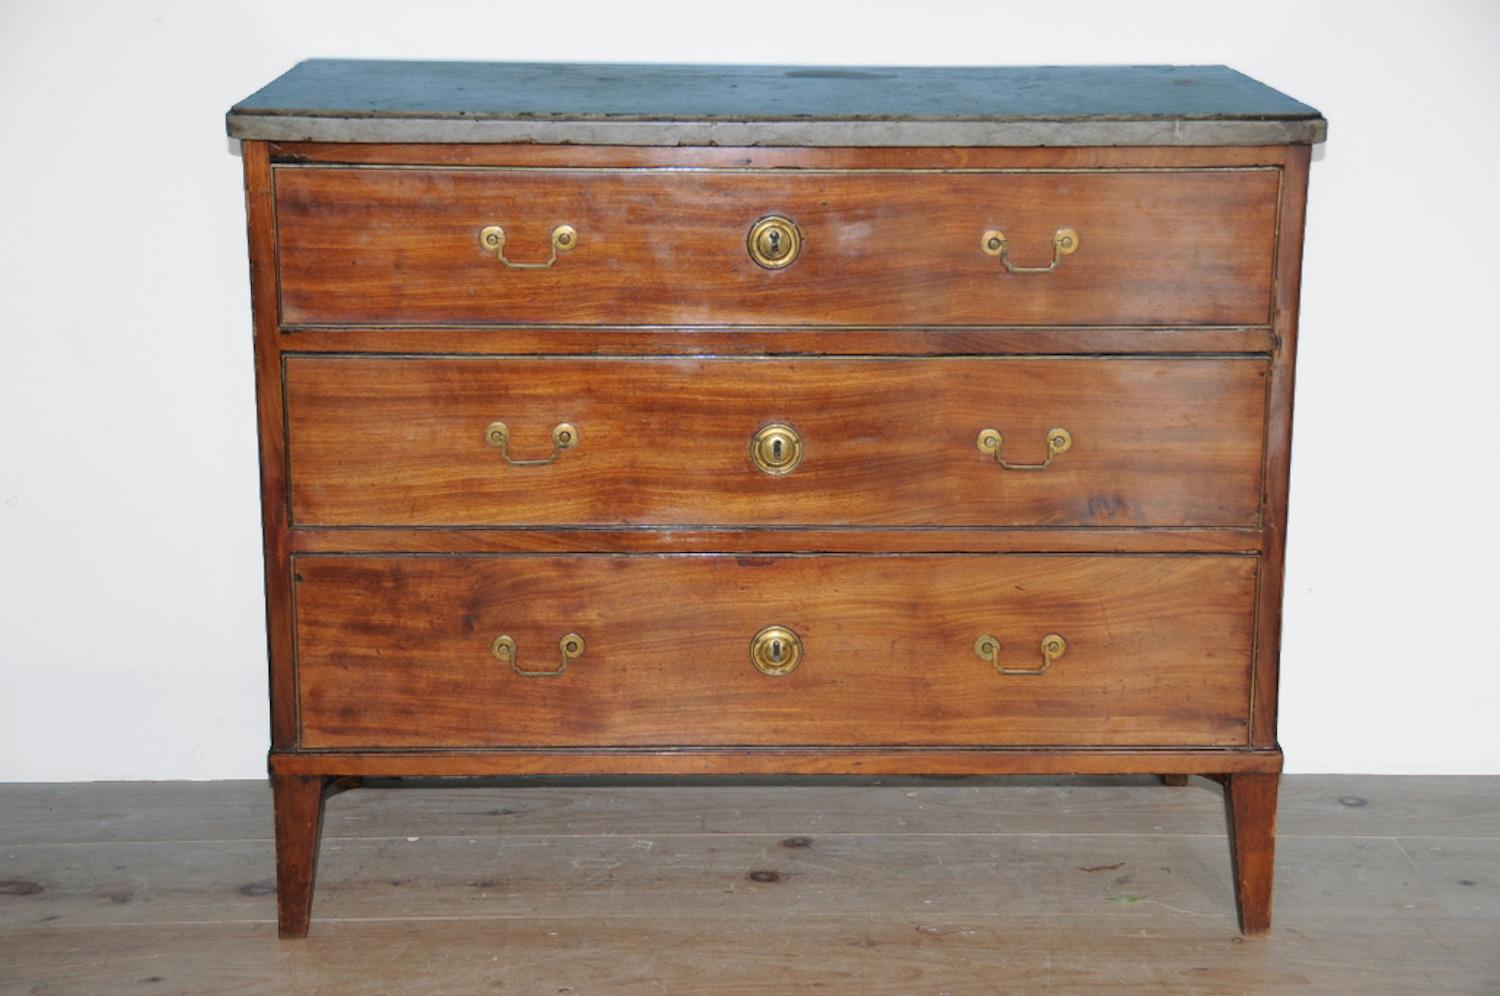 Exceptional Swedish 18th century Neo-classical chest of drawers / commode with a stone top, origin: Stockholm, Sweden, circa 1780 - 1800.

Mahogany and Kolmården marble, quarried in the province of Södermanland in Sweden; Beautiful patina and